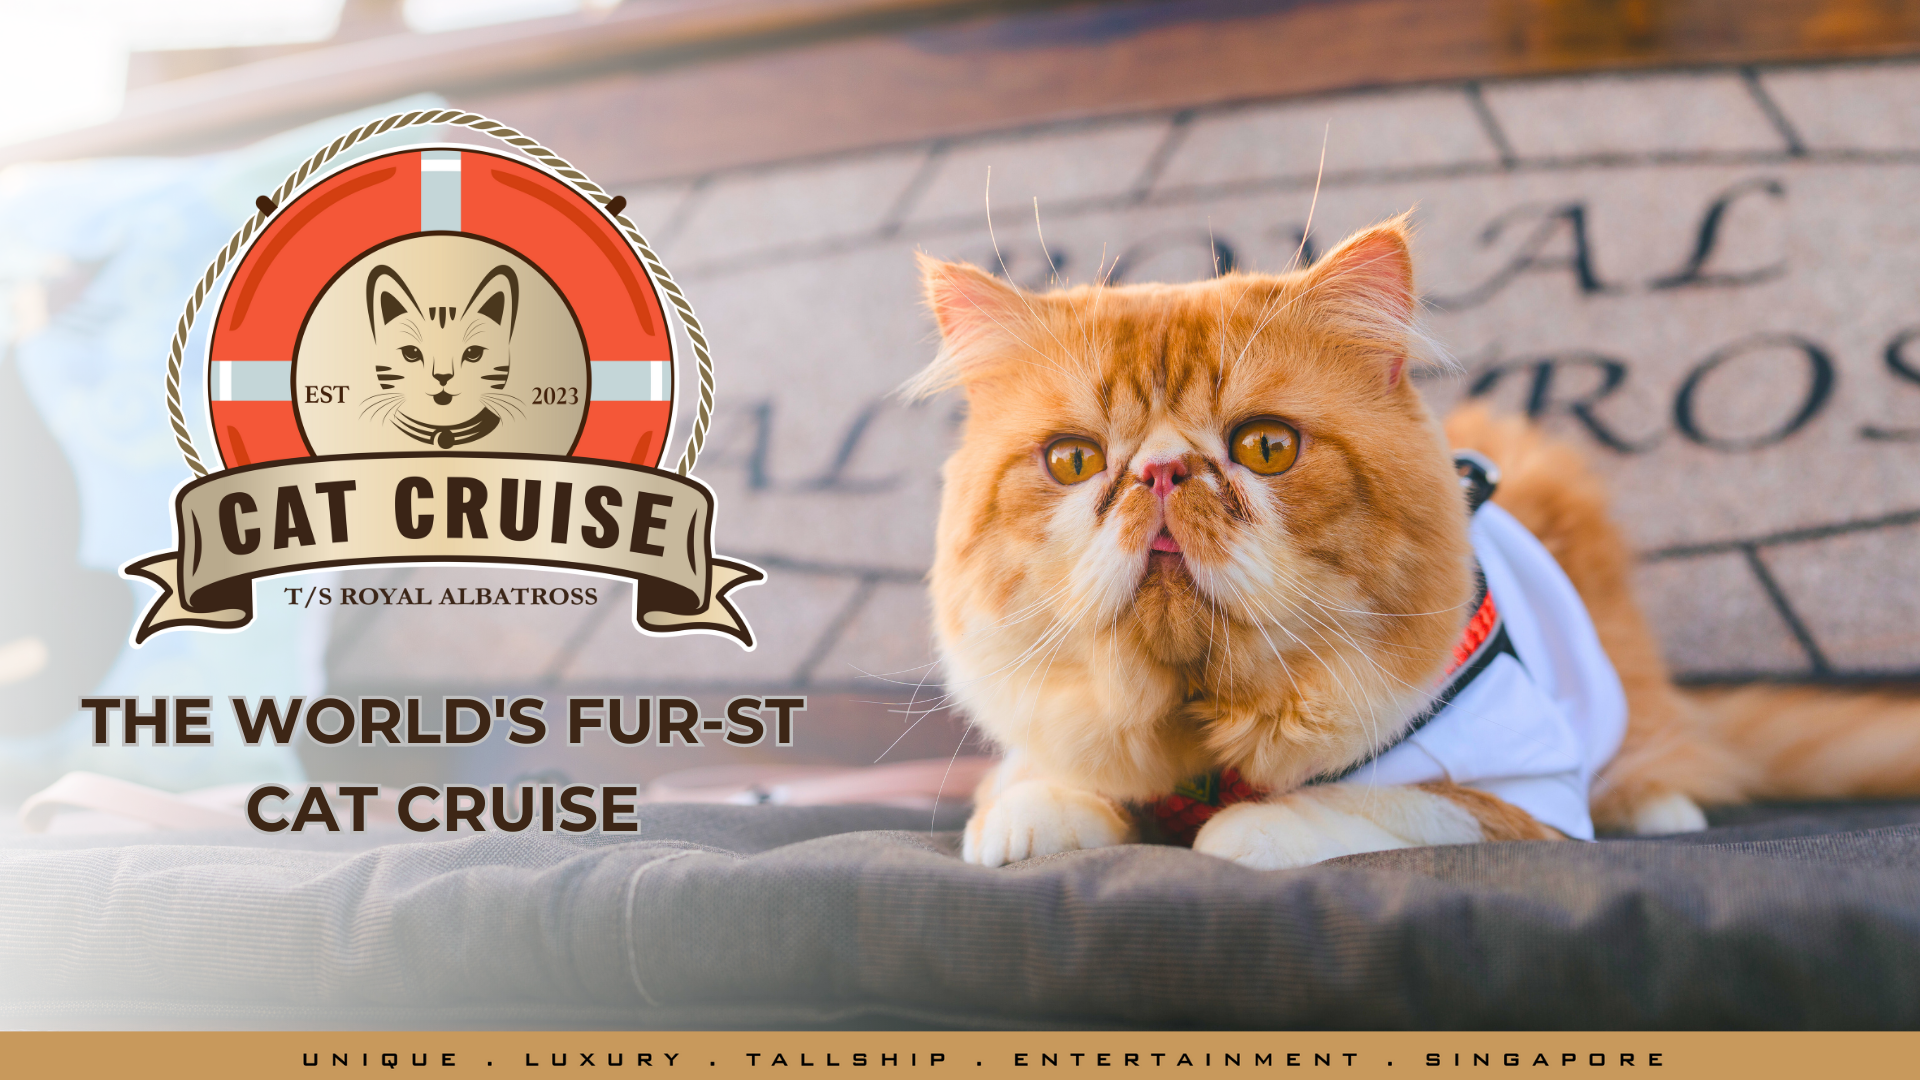 Cat Cruise by the Royal Albatross - The World's Fur-st Cat Cruise